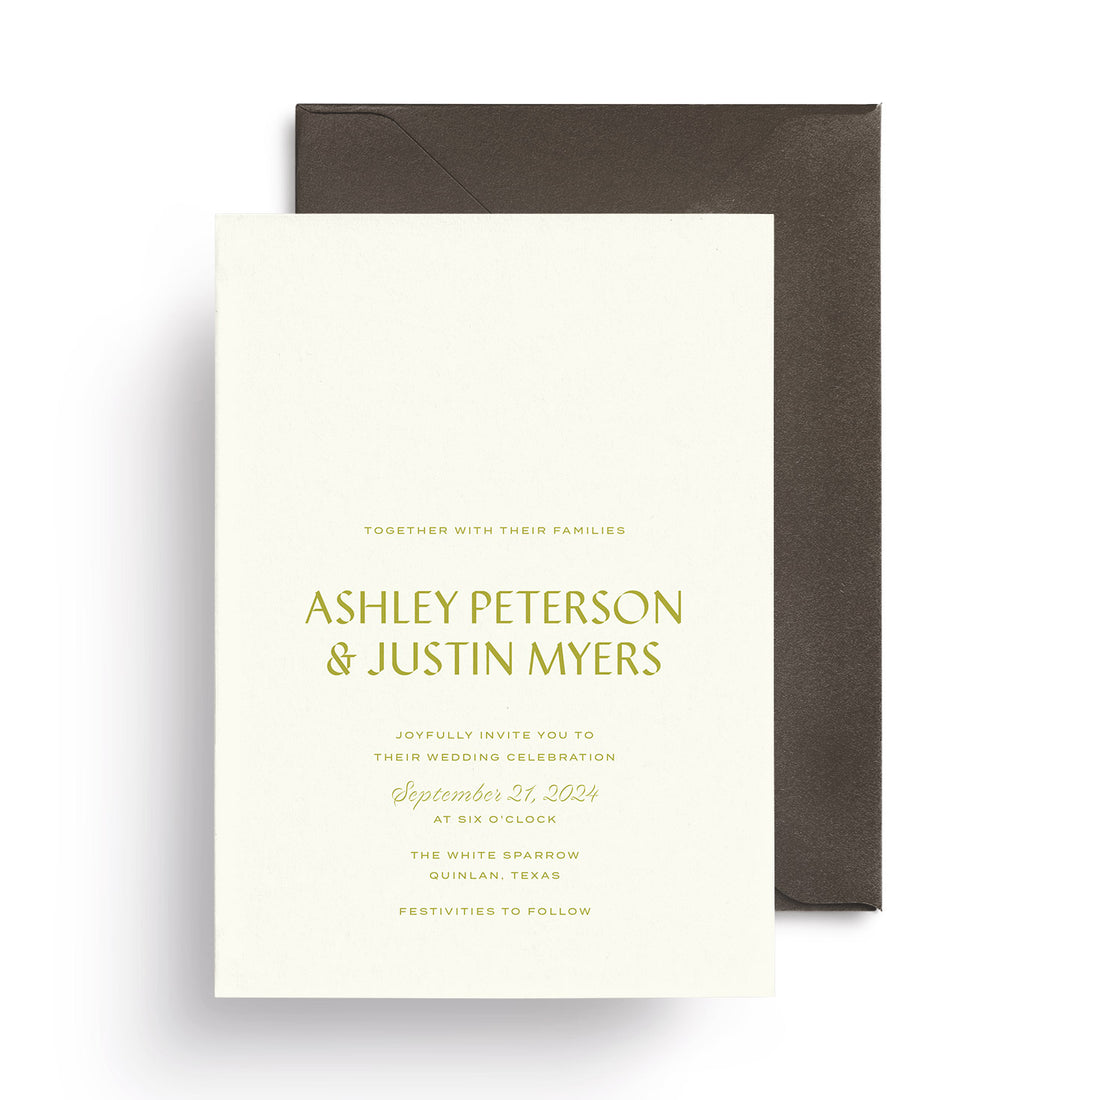 Customizable wedding invitation and envelope inspired by Dallas, Texas.